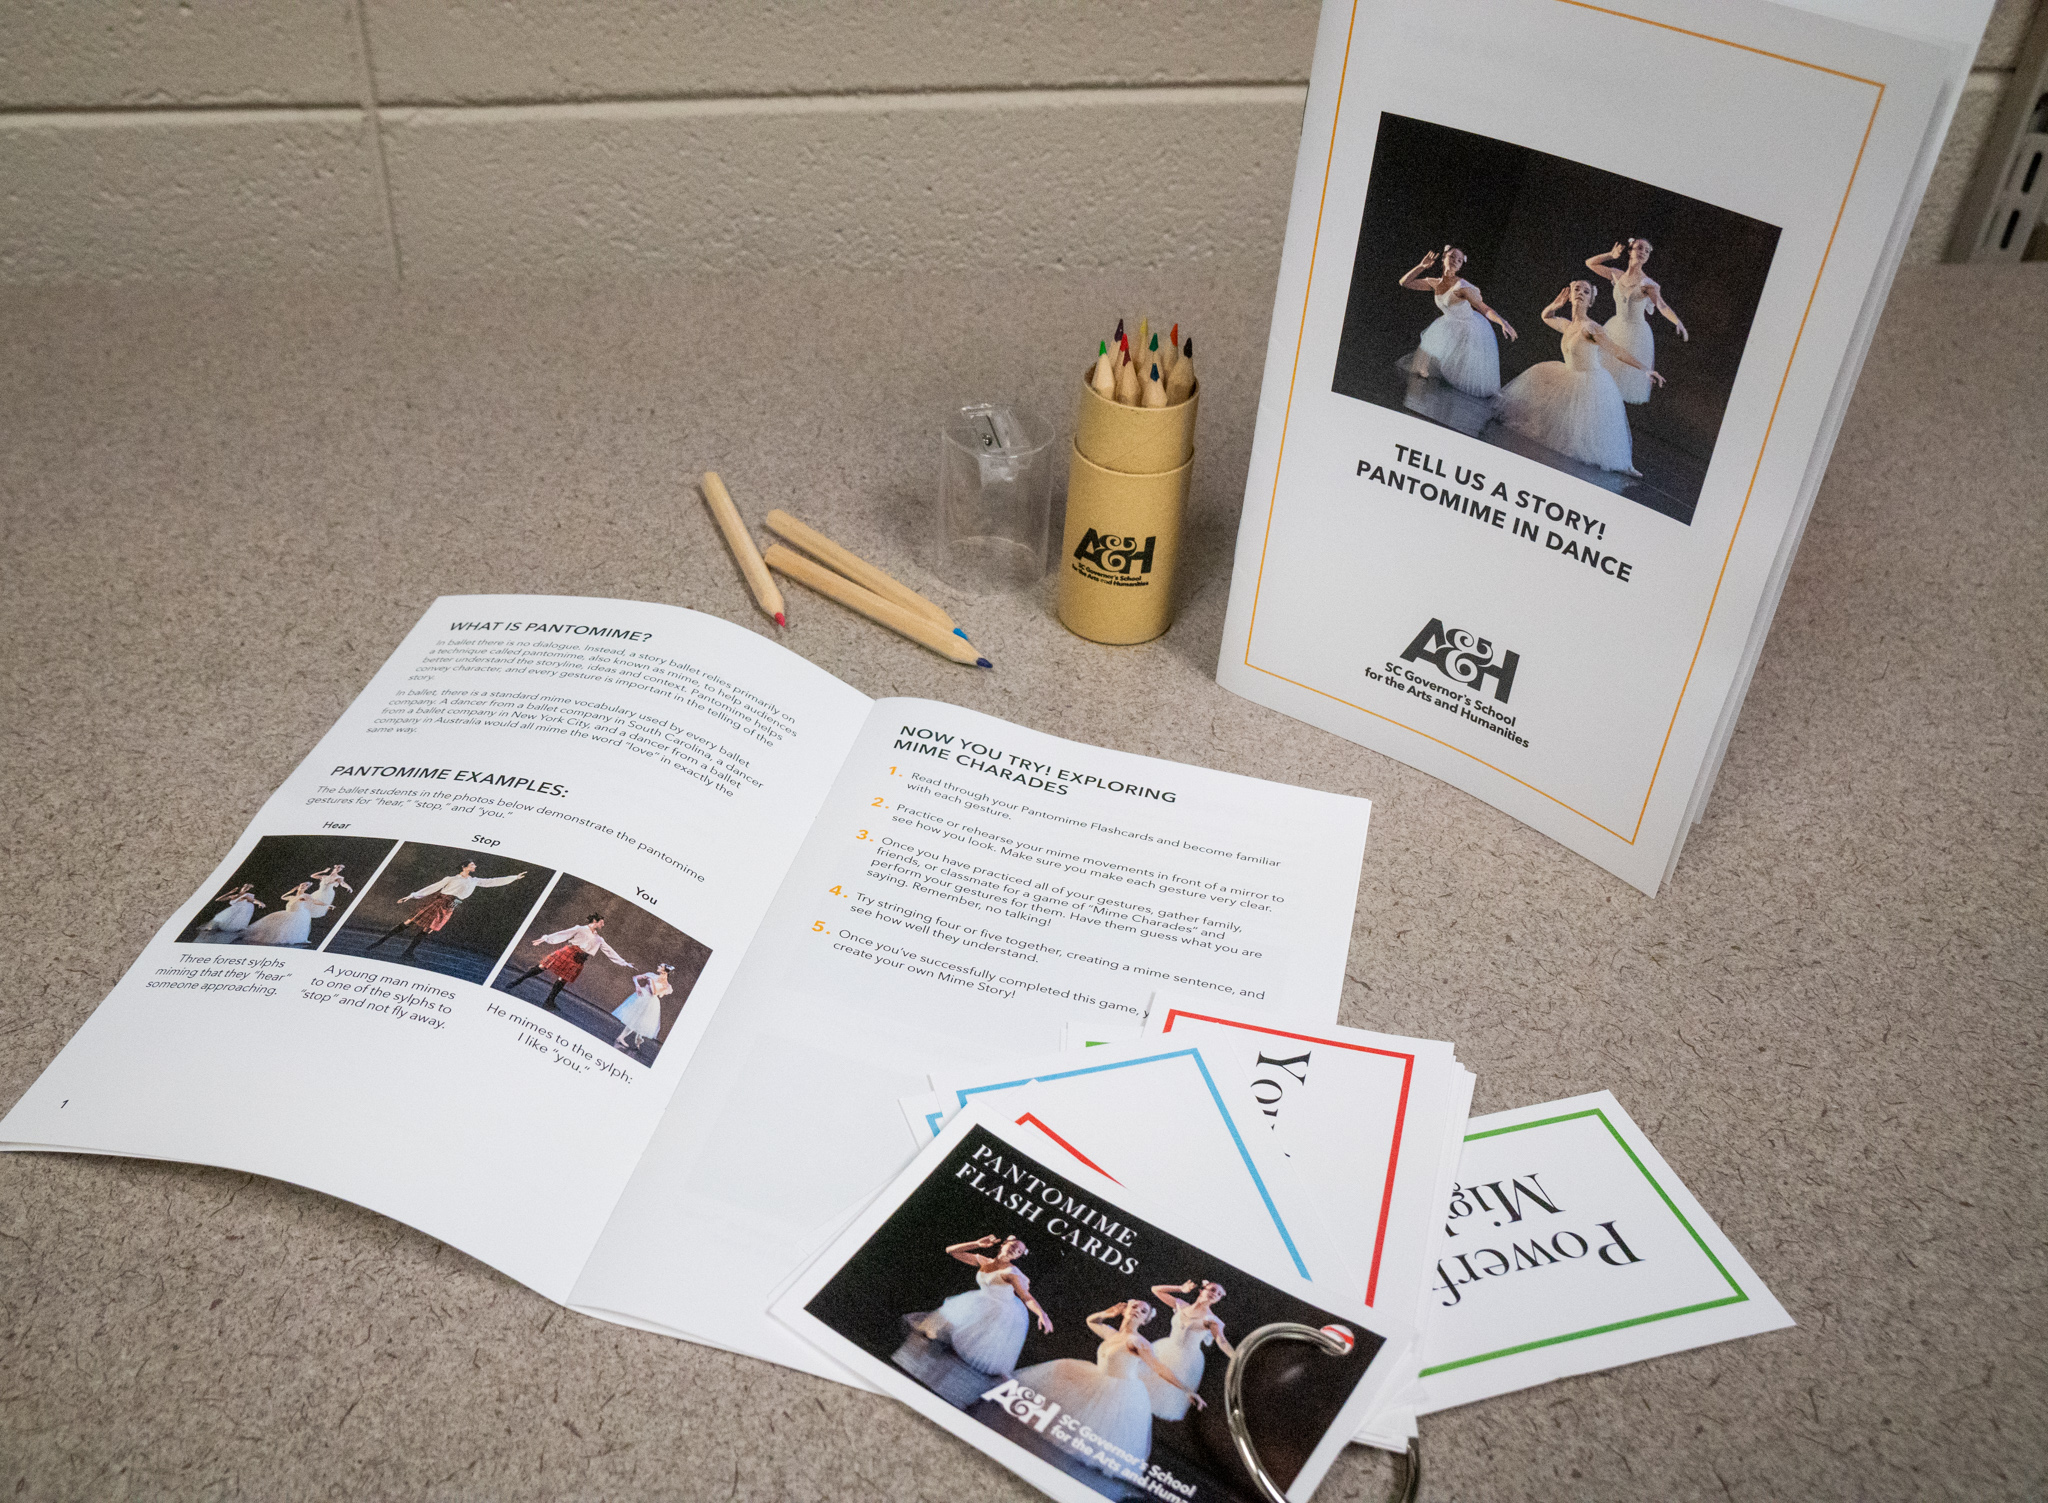 Pantomime in dance booklet and flash cards